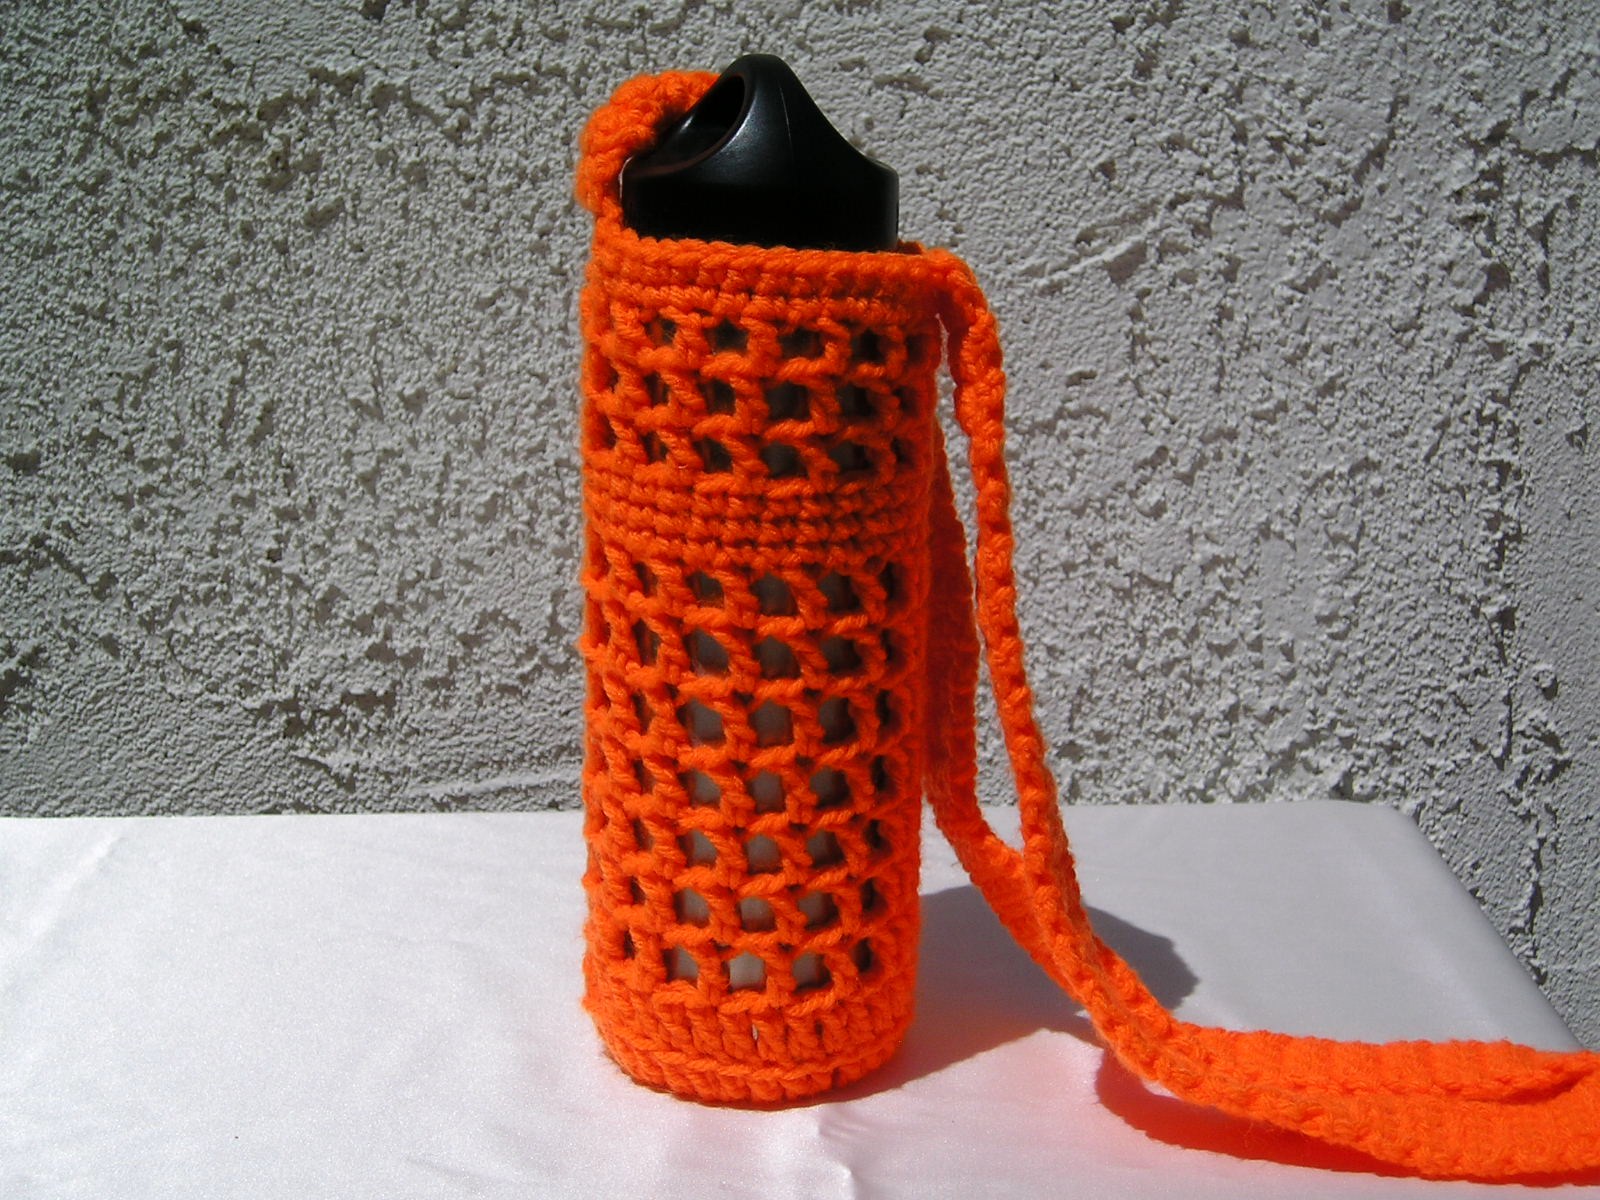 bright orange crocheted bag with water bottle inside